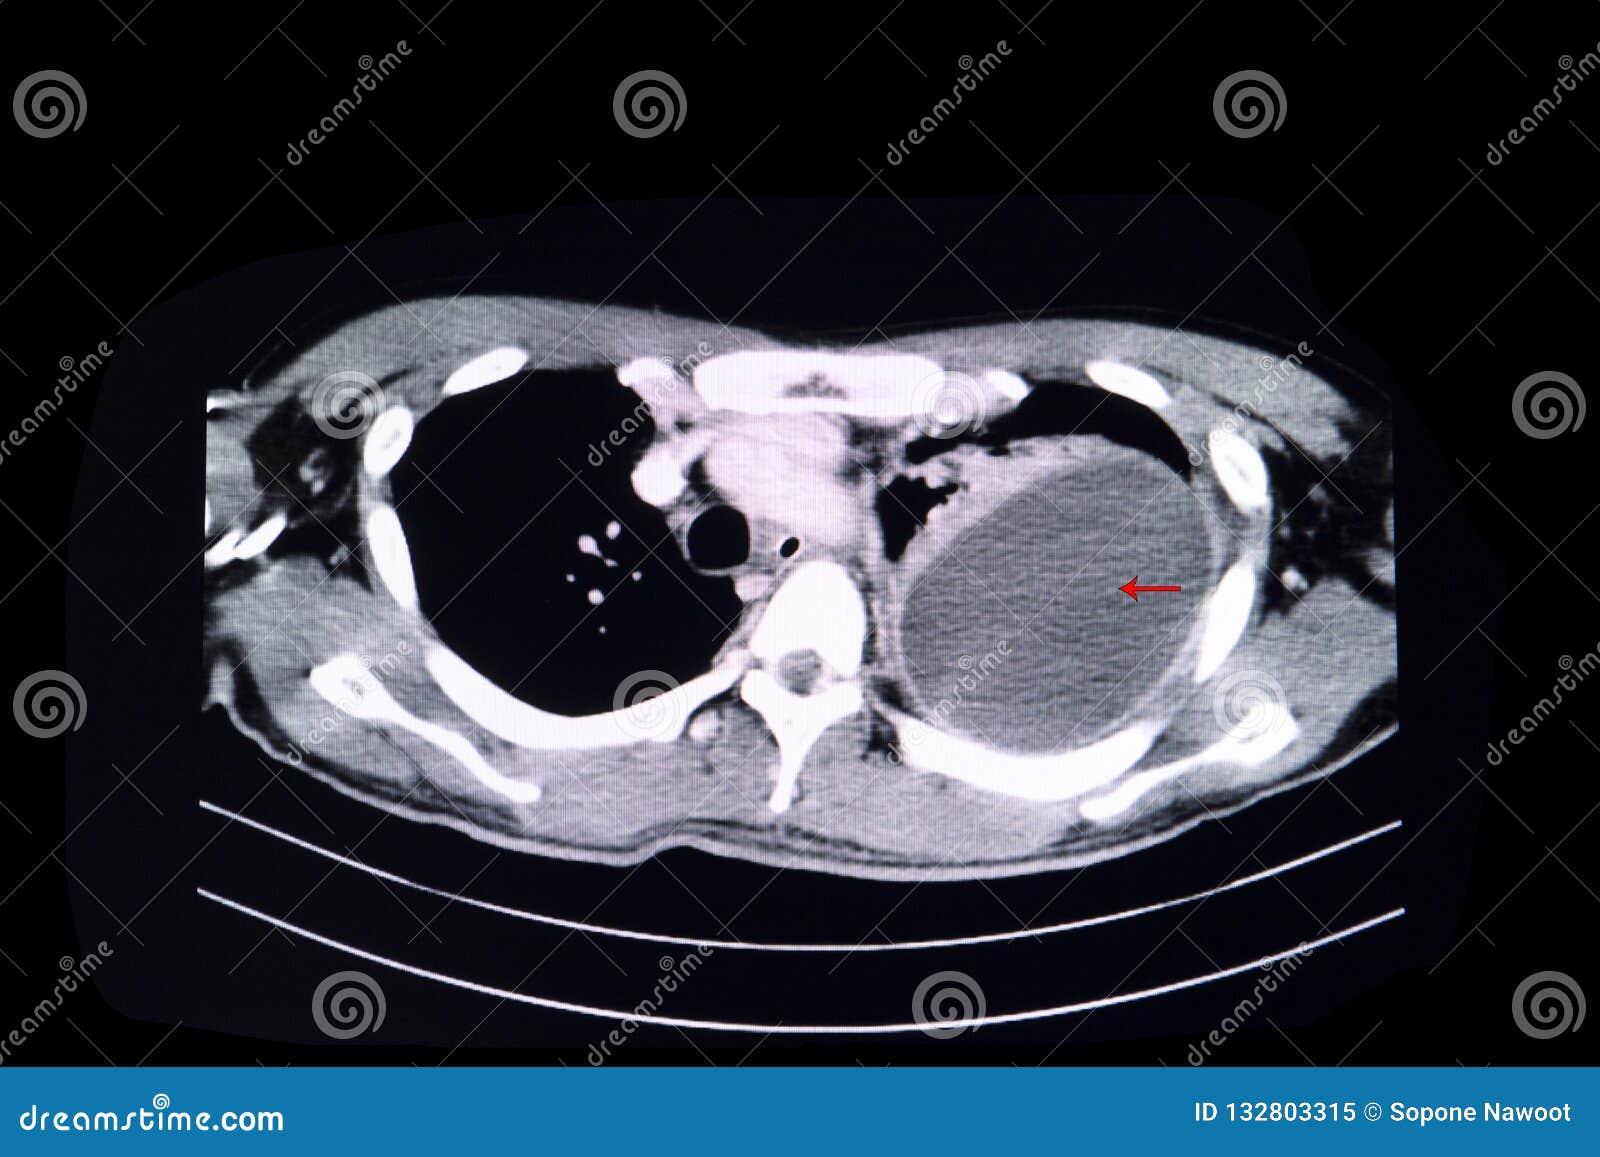 Loculated pleural effusion stock image. Image of computer ...